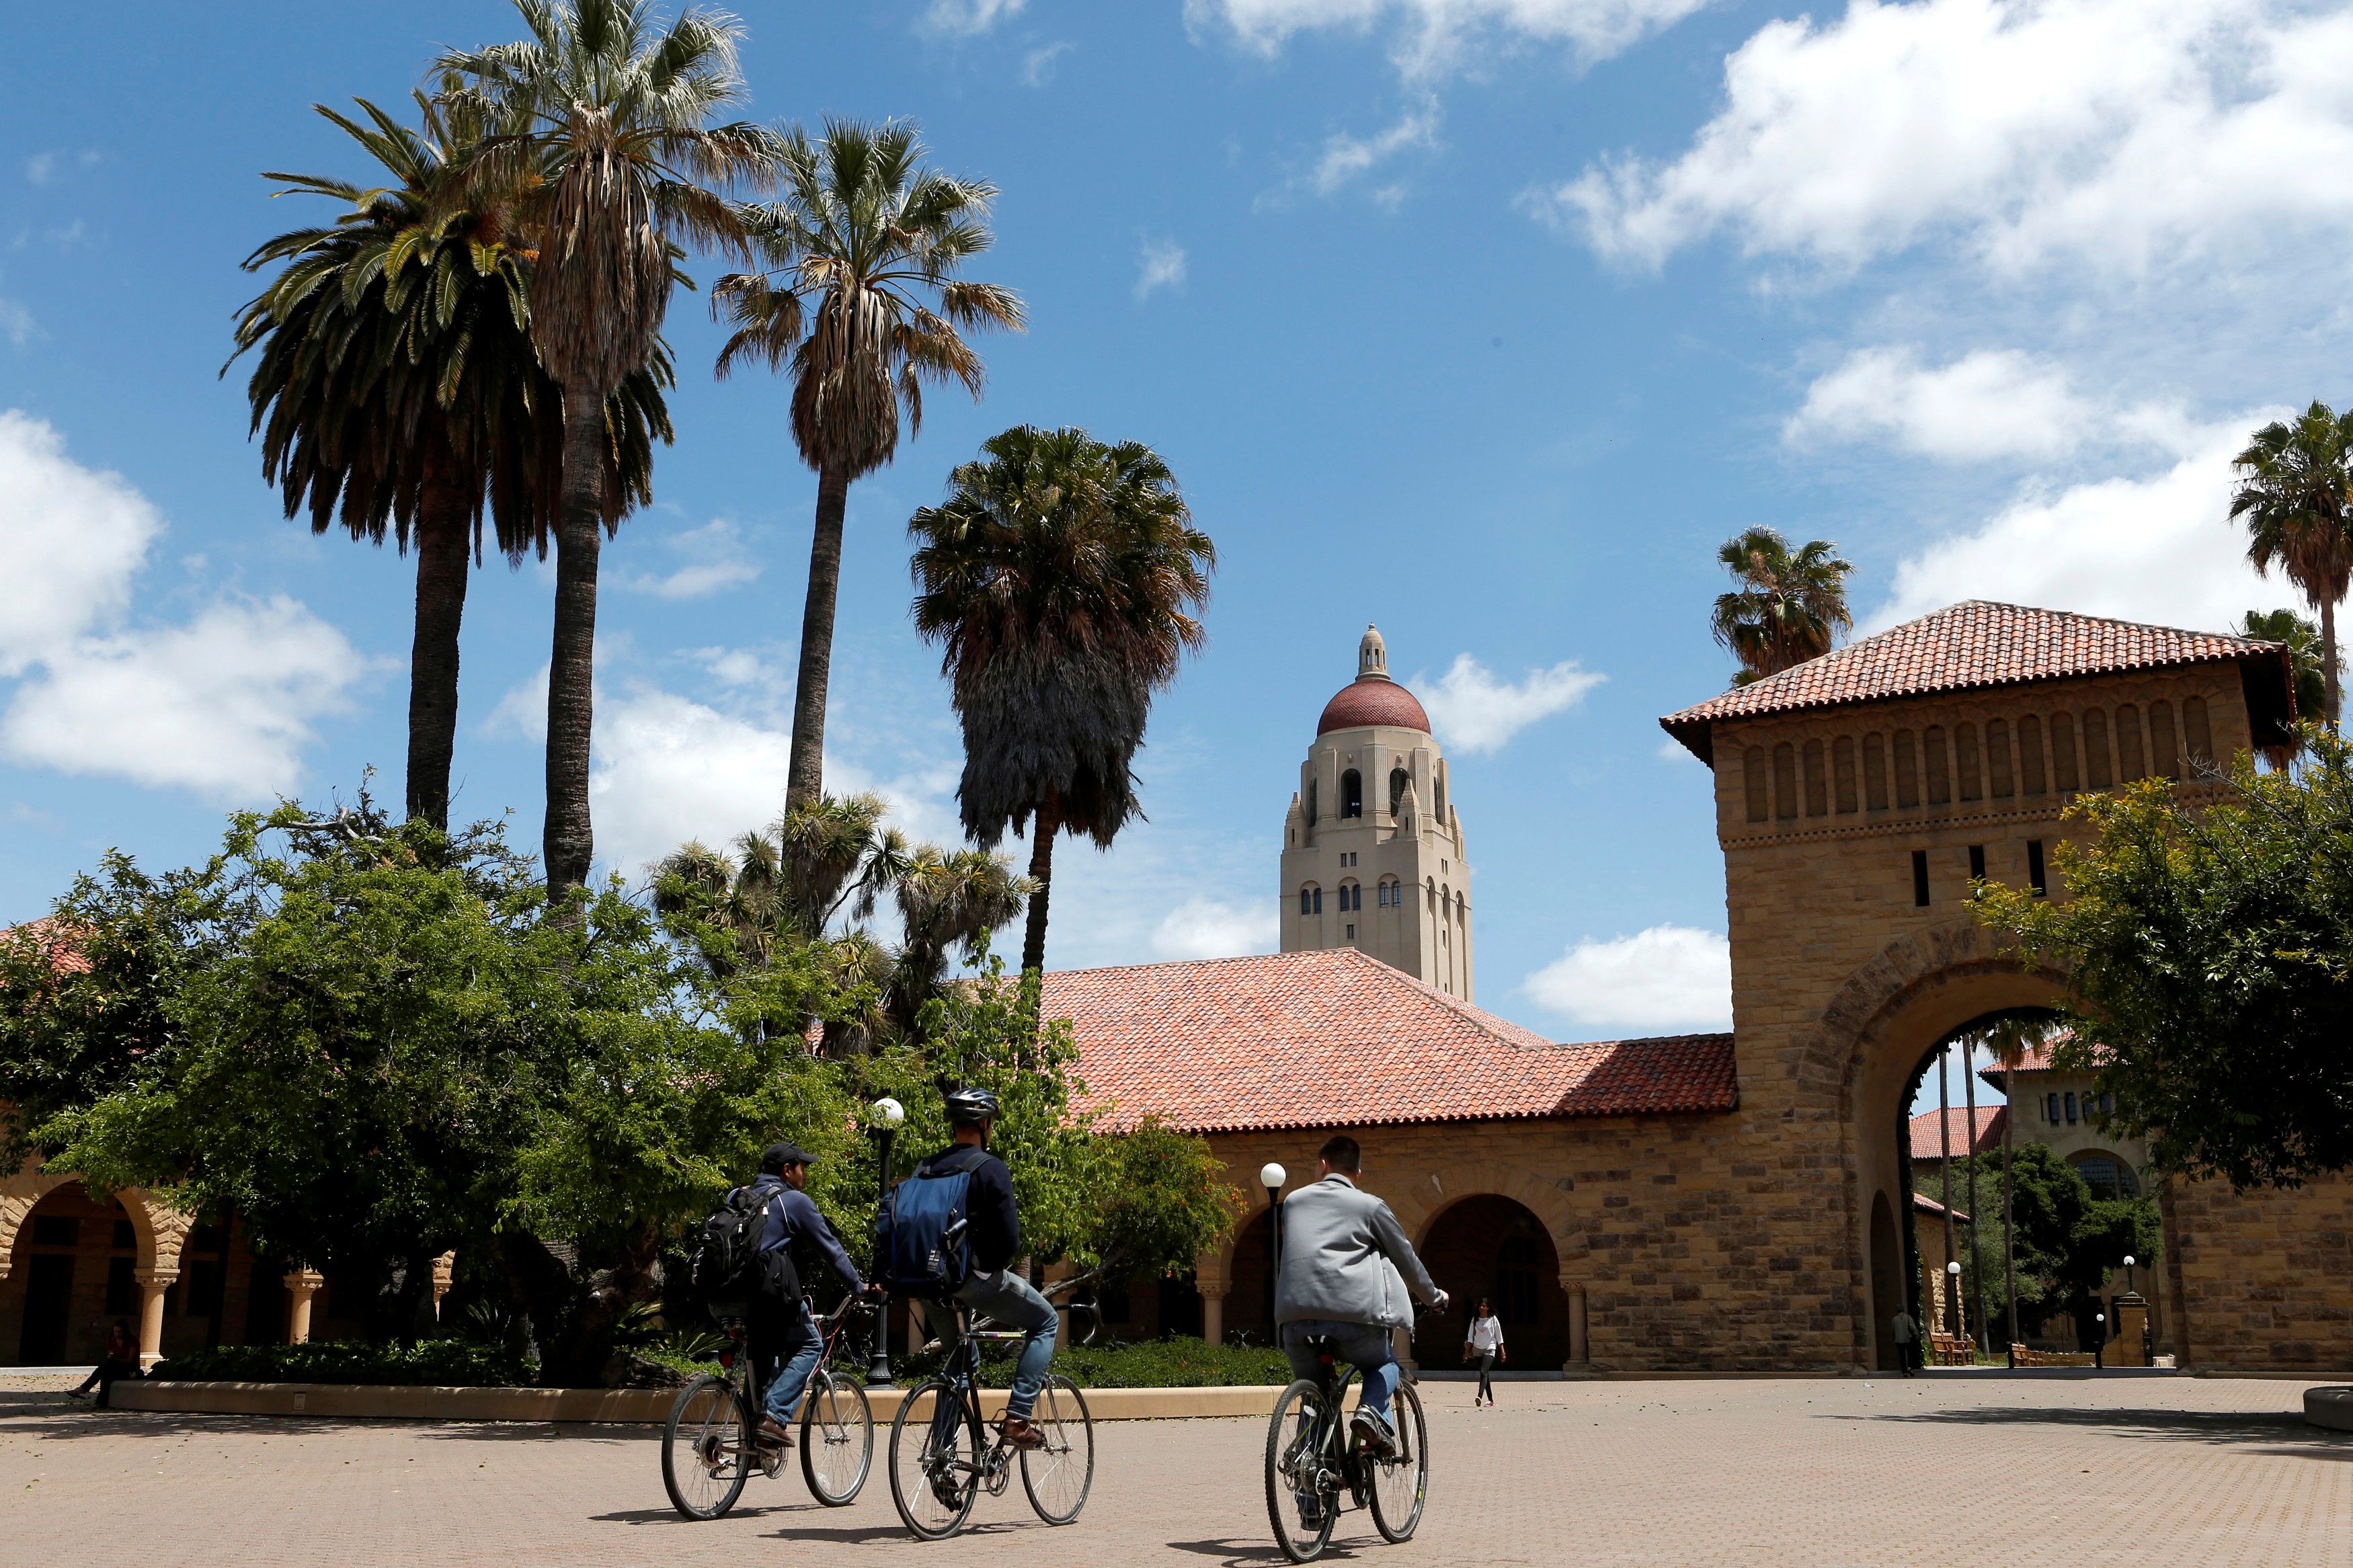 Cyclists traverse the main quad on Stanford University's campus in Stanford California